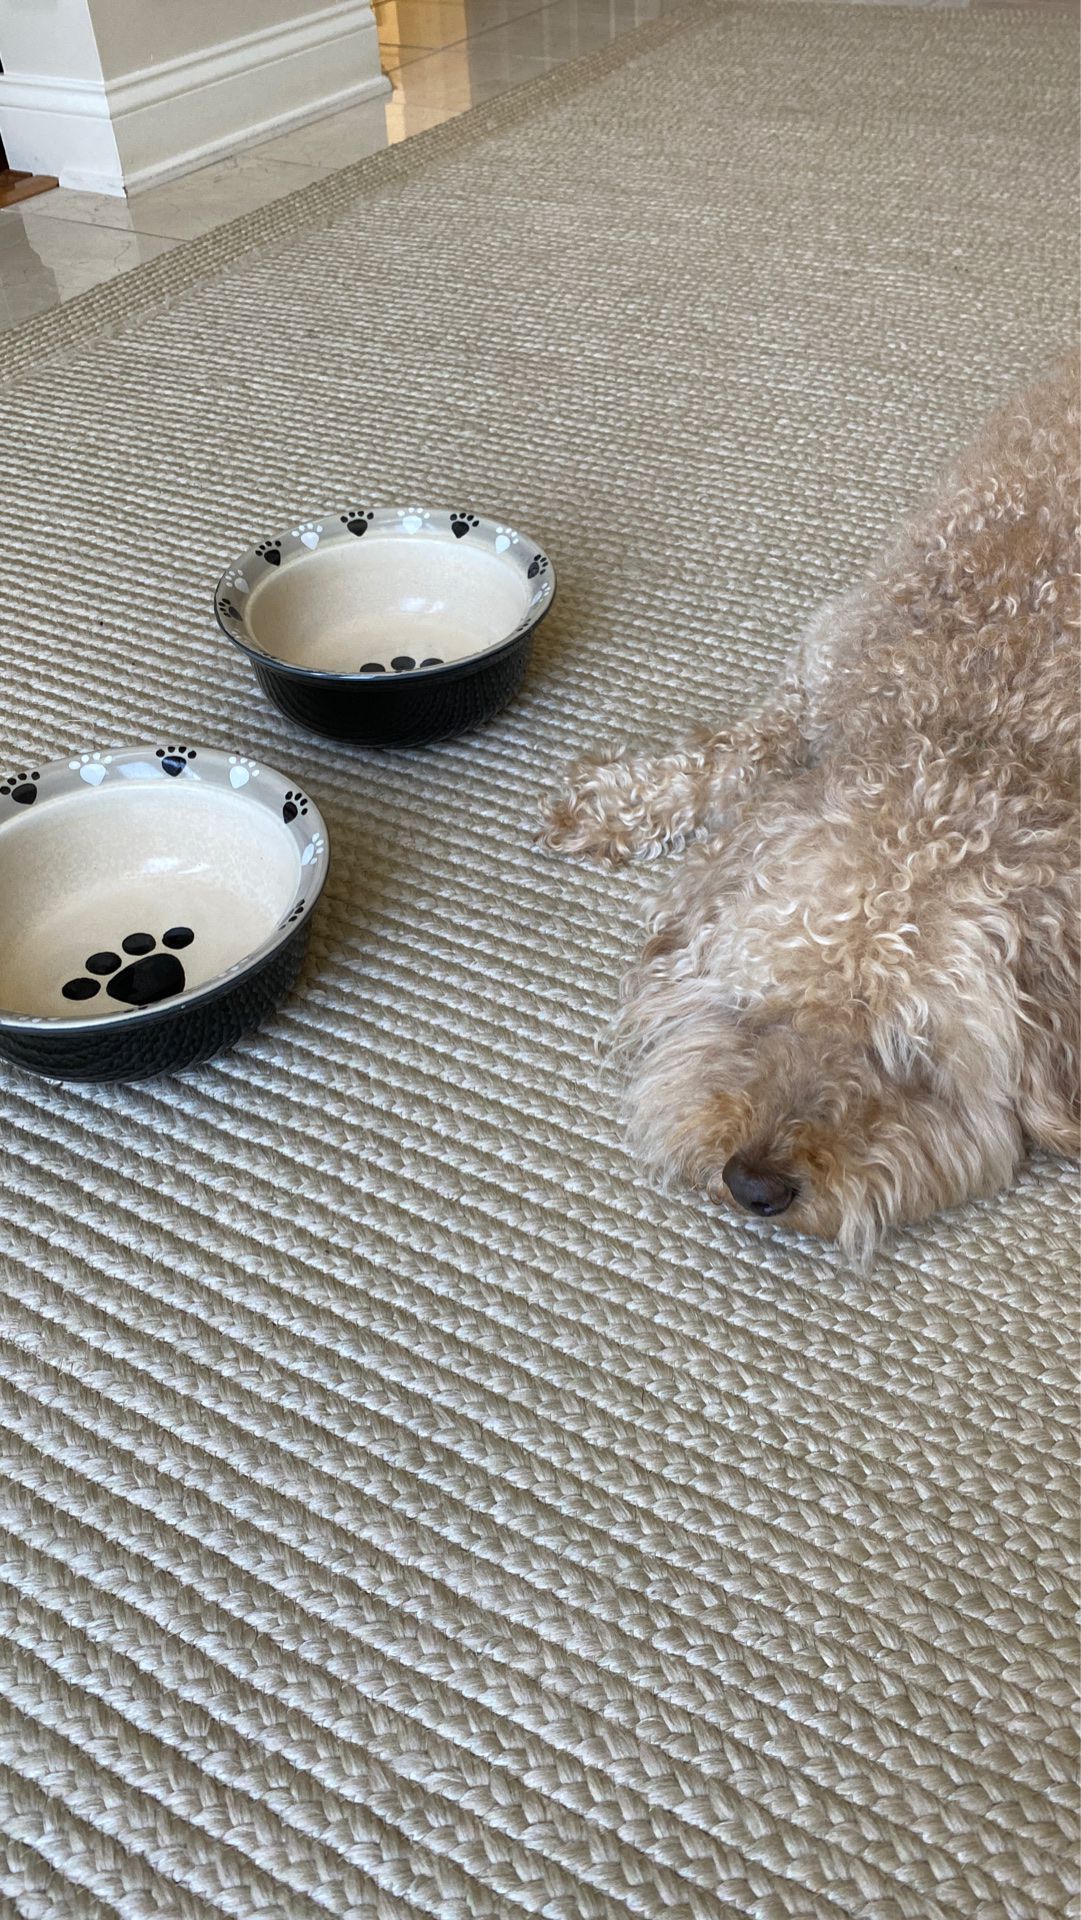 $5/ea - Absolutely Adorable Dog Bowls!